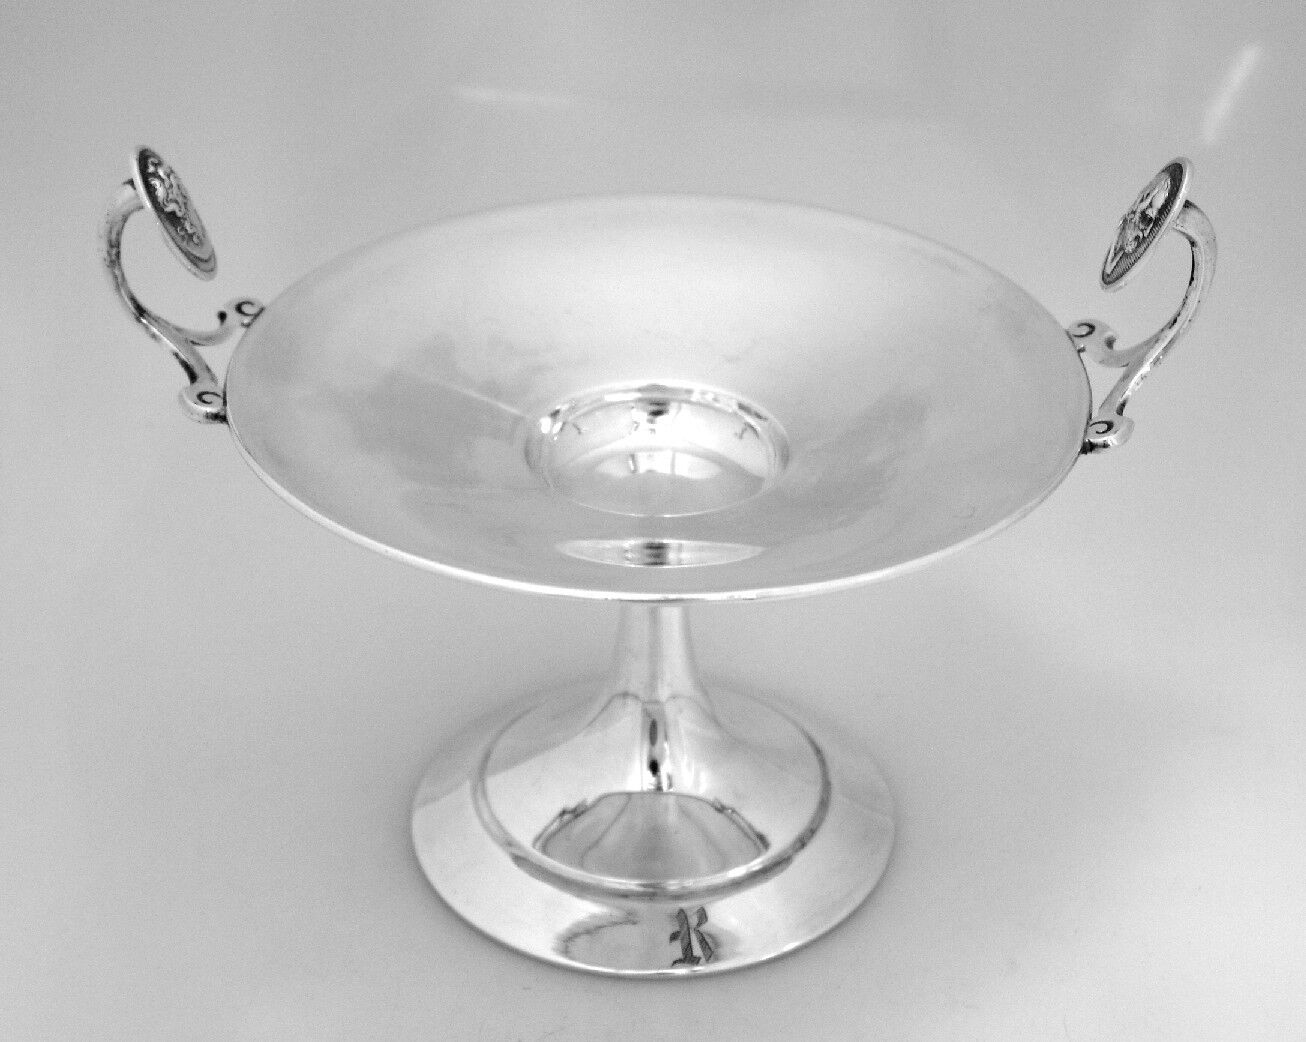 Medallion Coin Silver Compote Gorham 1865